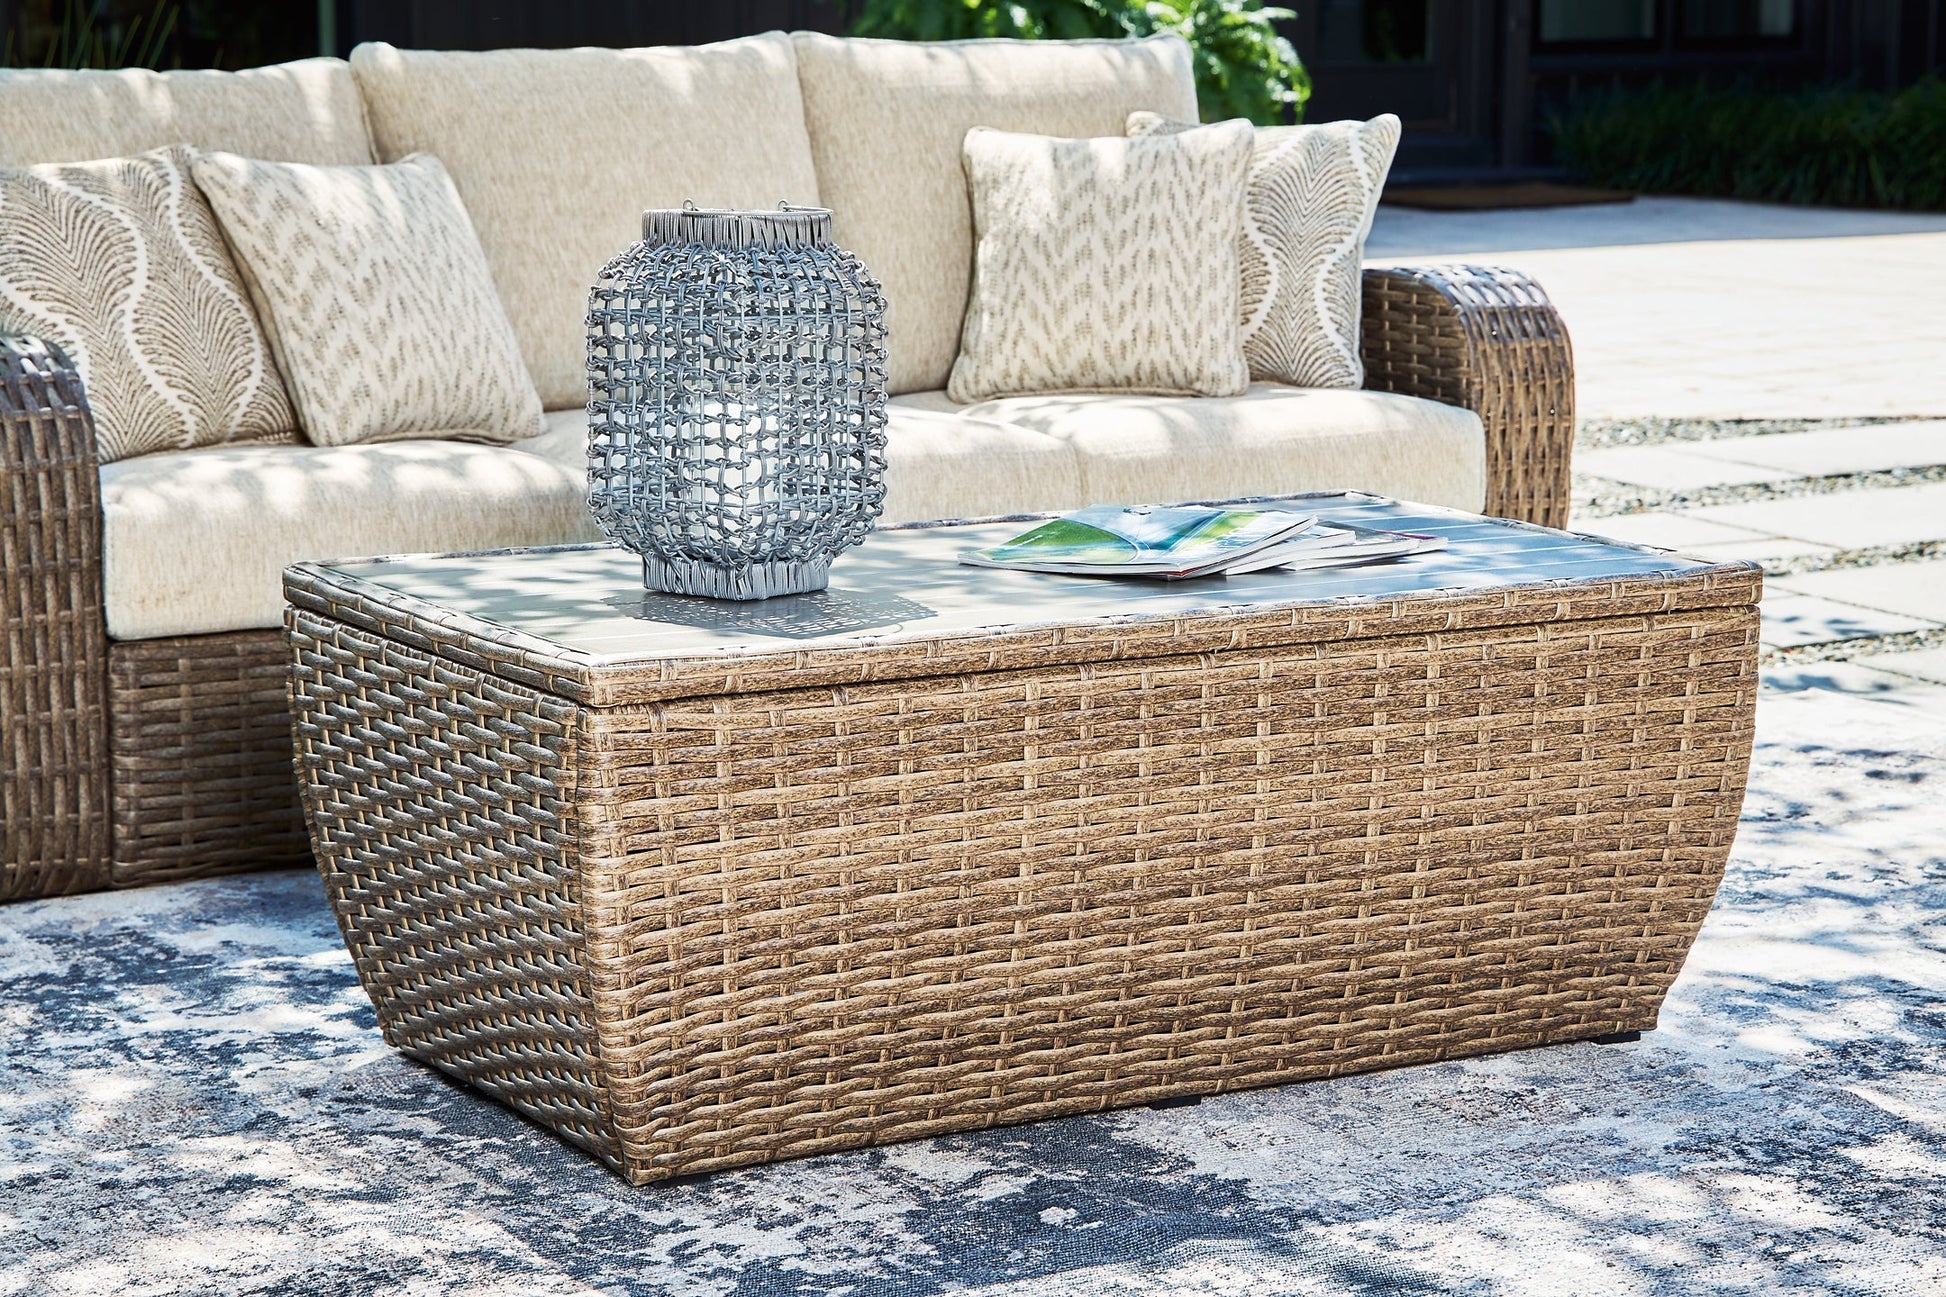 Sandy Bloom Outdoor Coffee Table with 2 End Tables Rent Wise Rent To Own Jacksonville, Florida